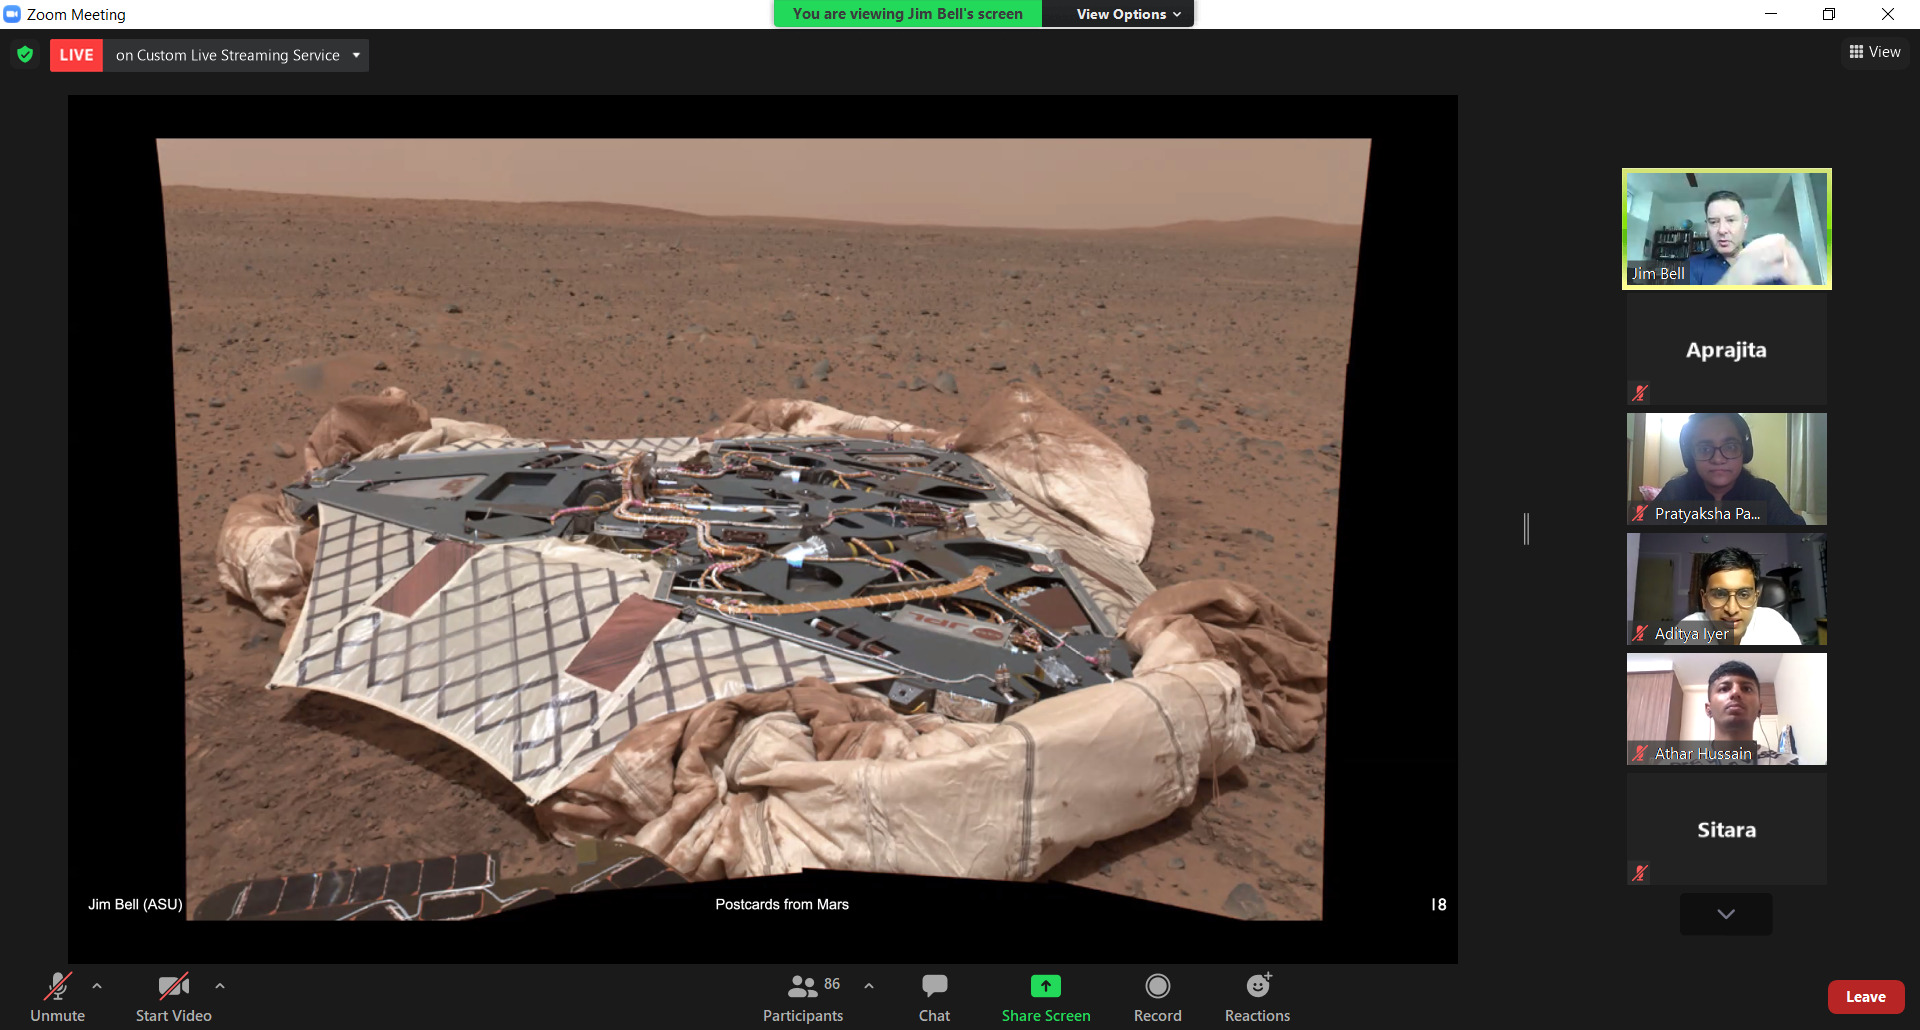 Image of the Spirit lander comprising of airbags that brought the rover to the surface of Mars.